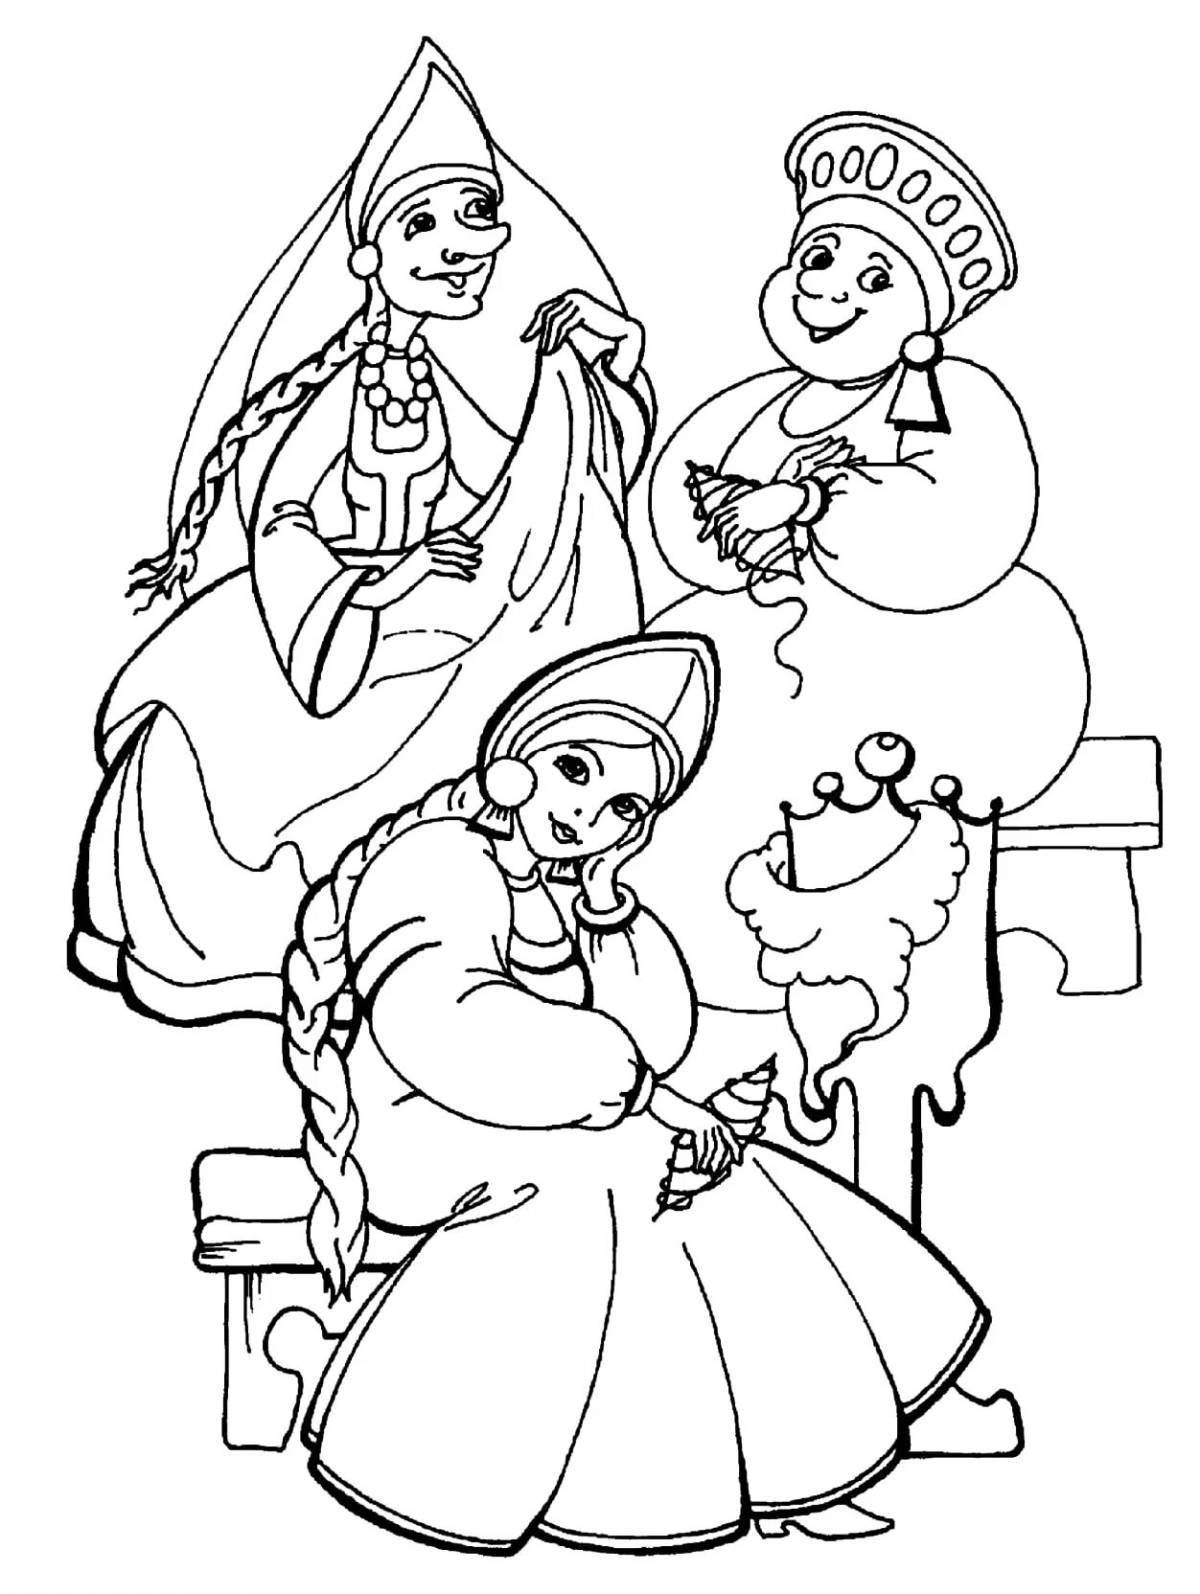 Colorful Pushkin's fairy tale coloring page